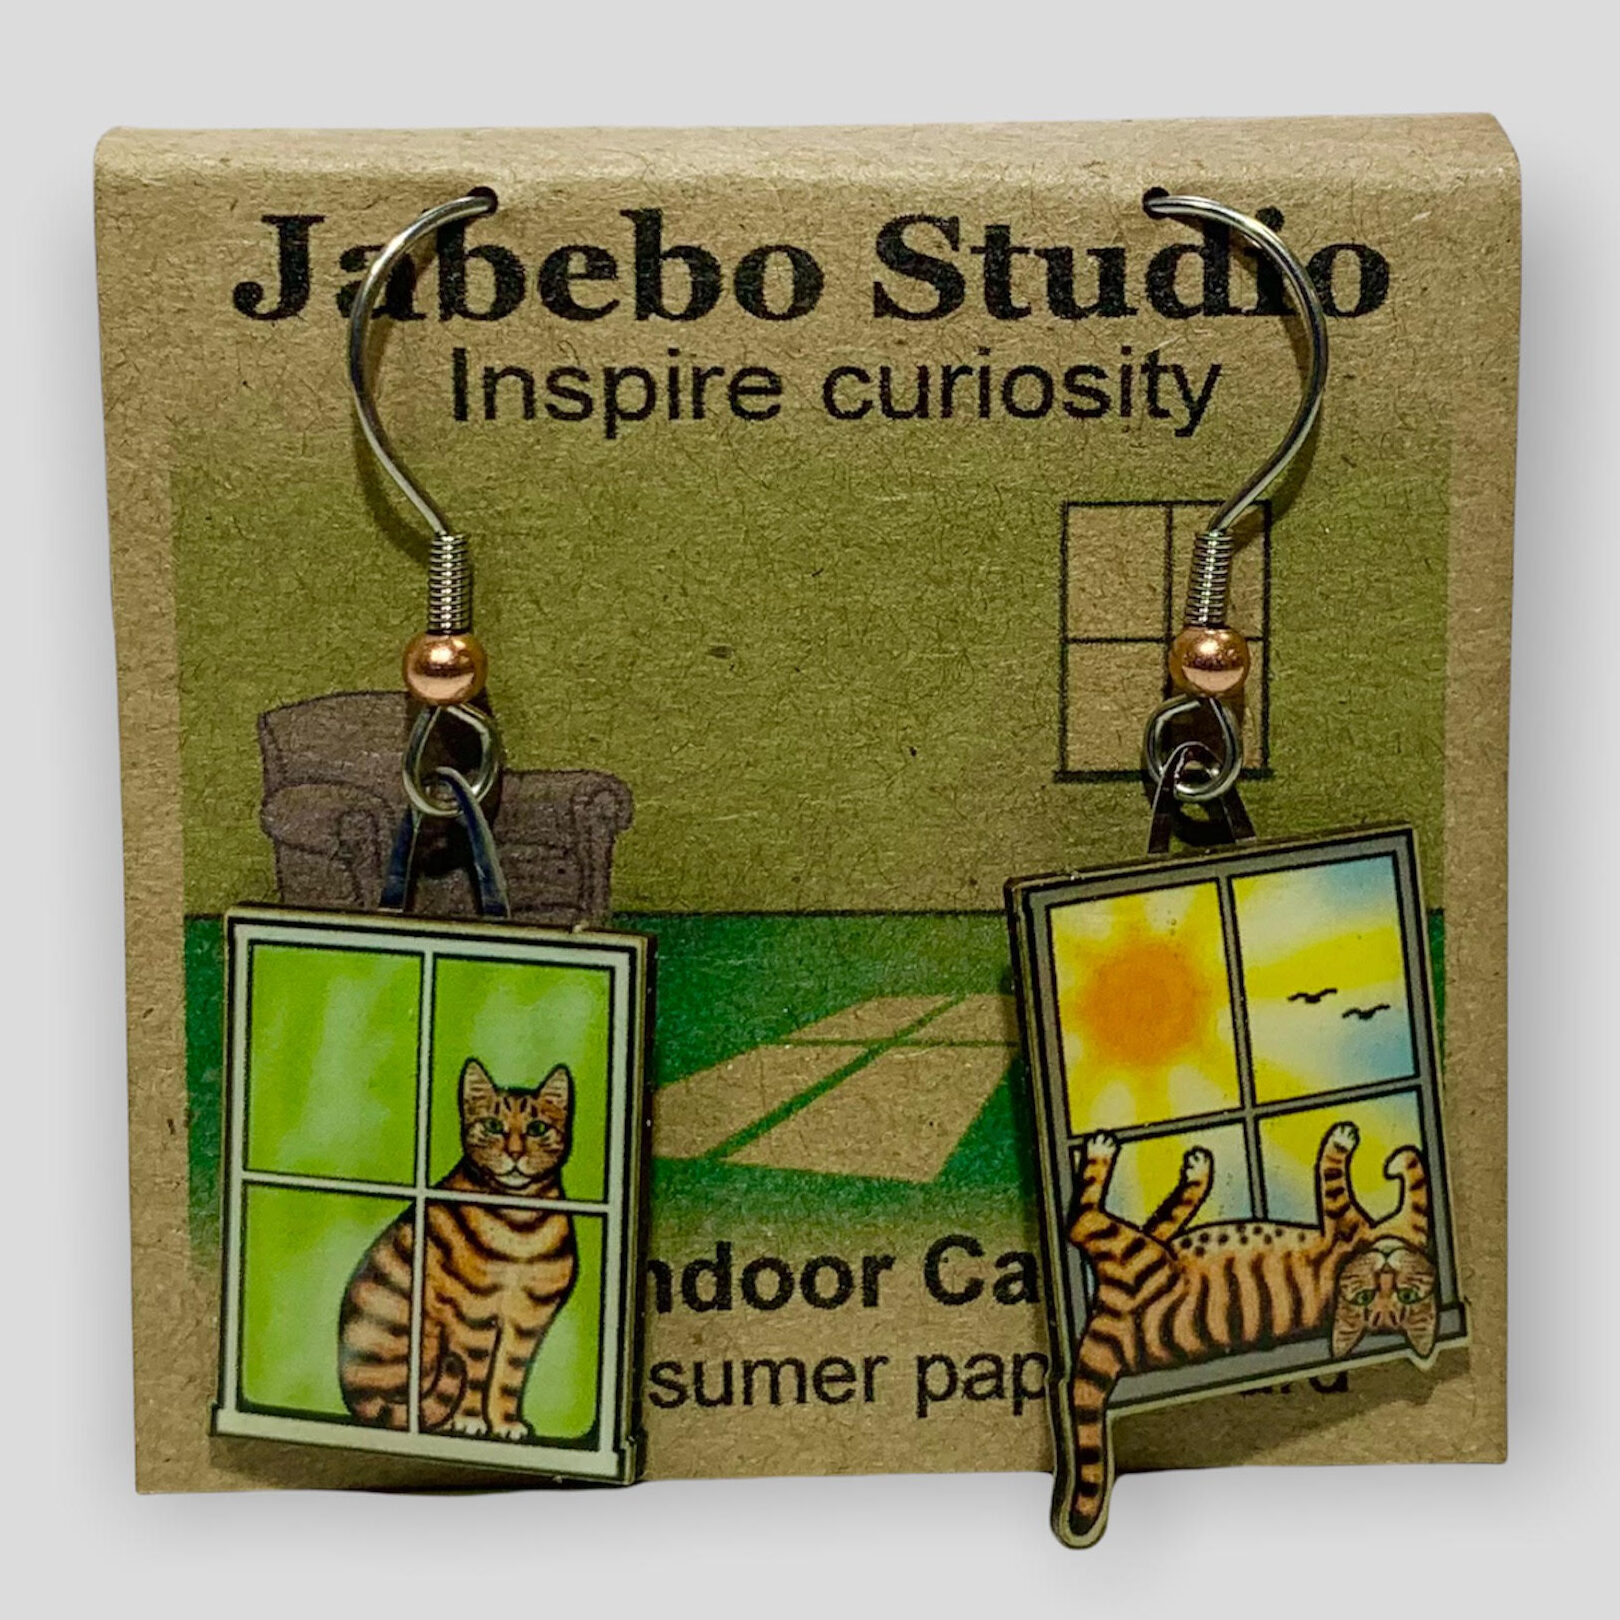 Picture shown is of 1 inch tall pair of earrings of the pet the Indoor Cat sitting on a window.